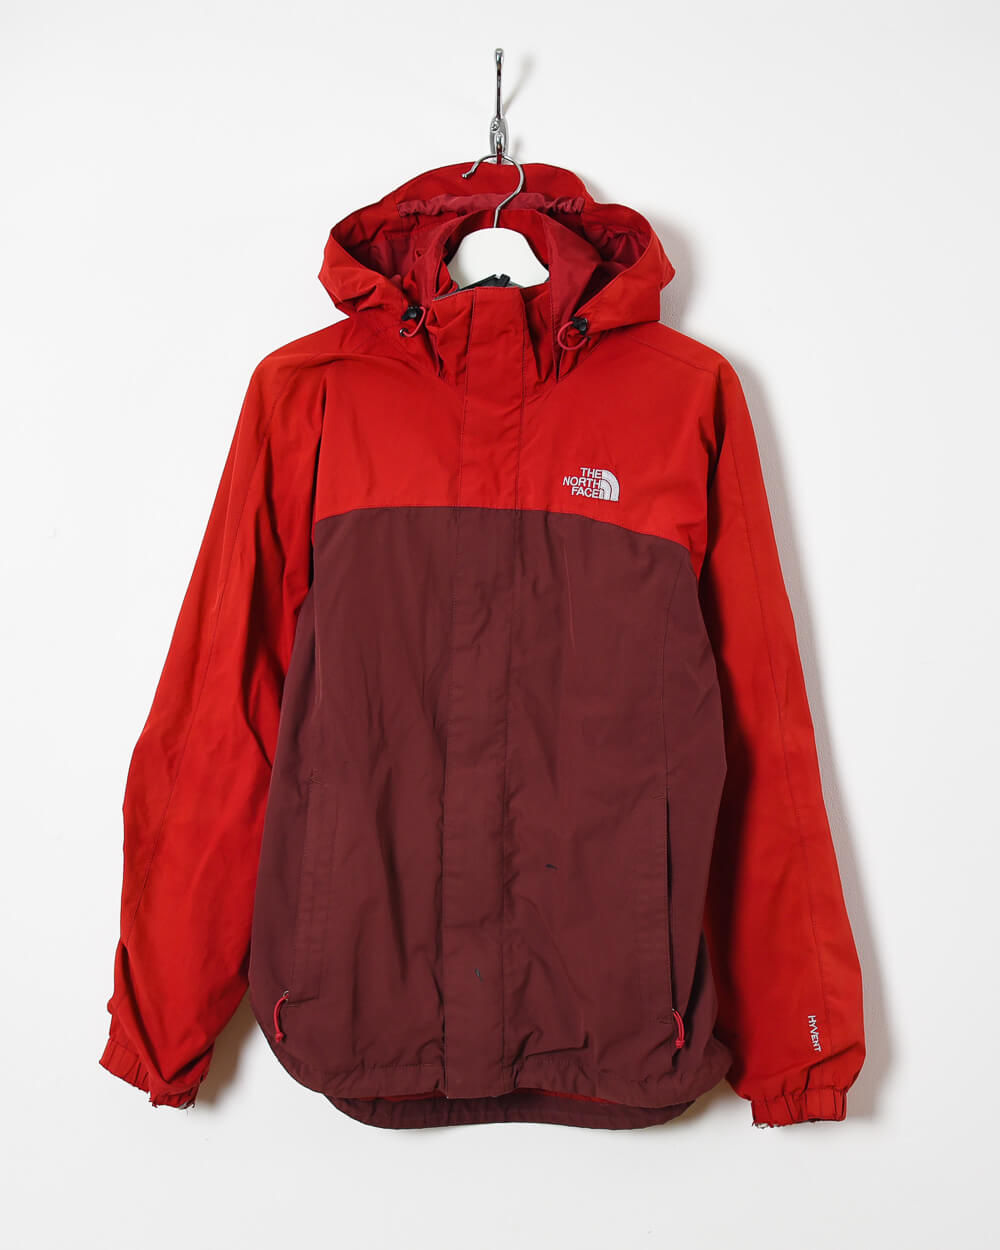 The North Face Hyvent Hooded Jacket - Small - Domno Vintage 90s, 80s, 00s Retro and Vintage Clothing 